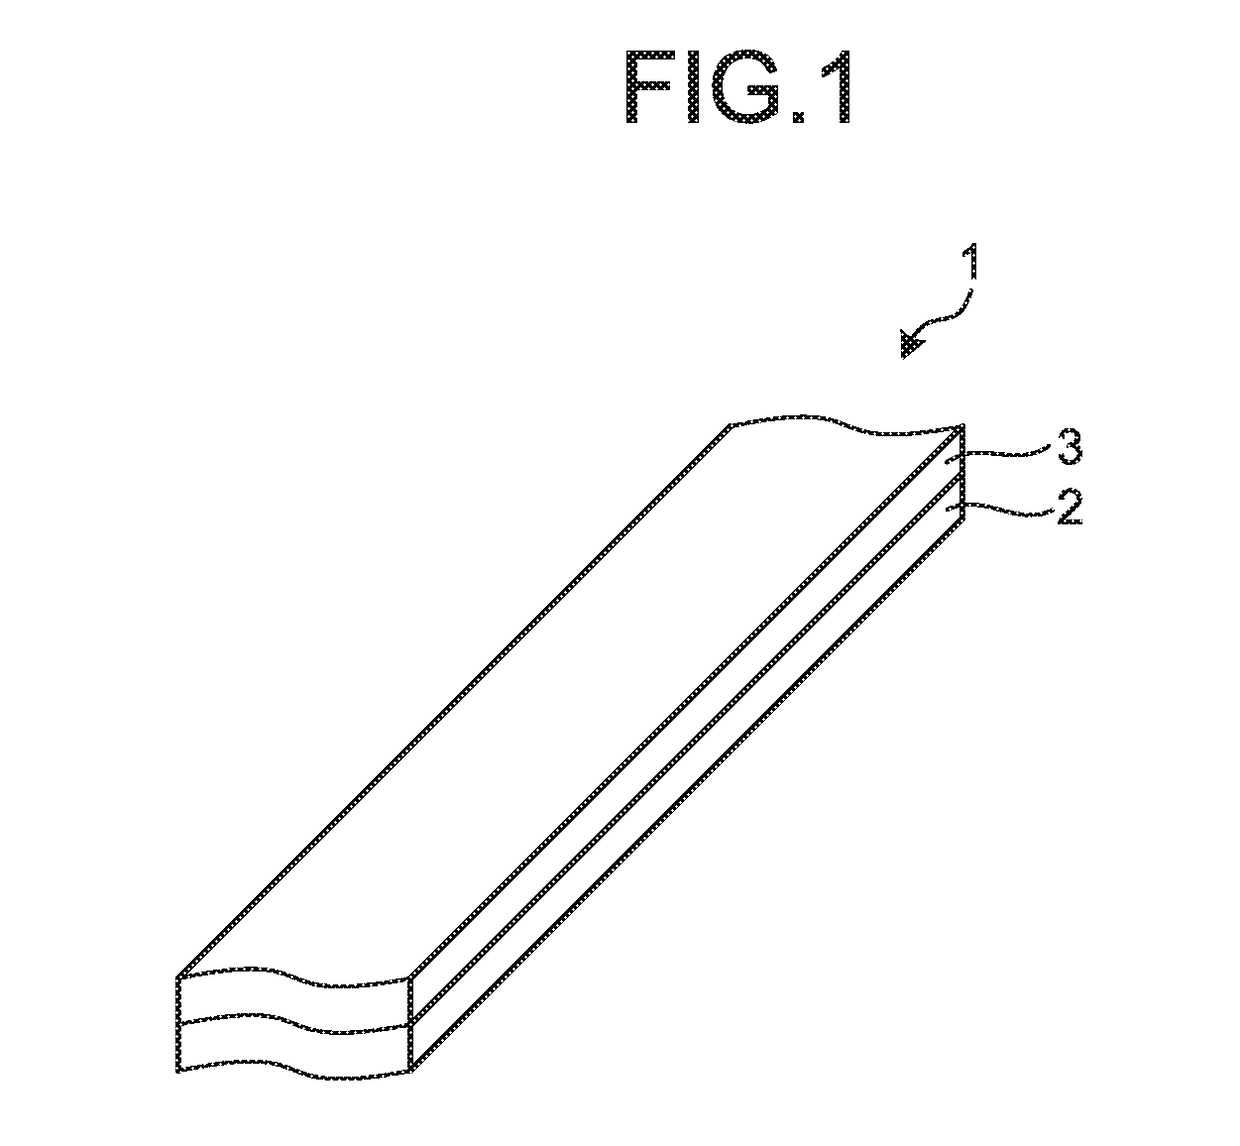 Adhesive tape and wire harness having adhesive tape